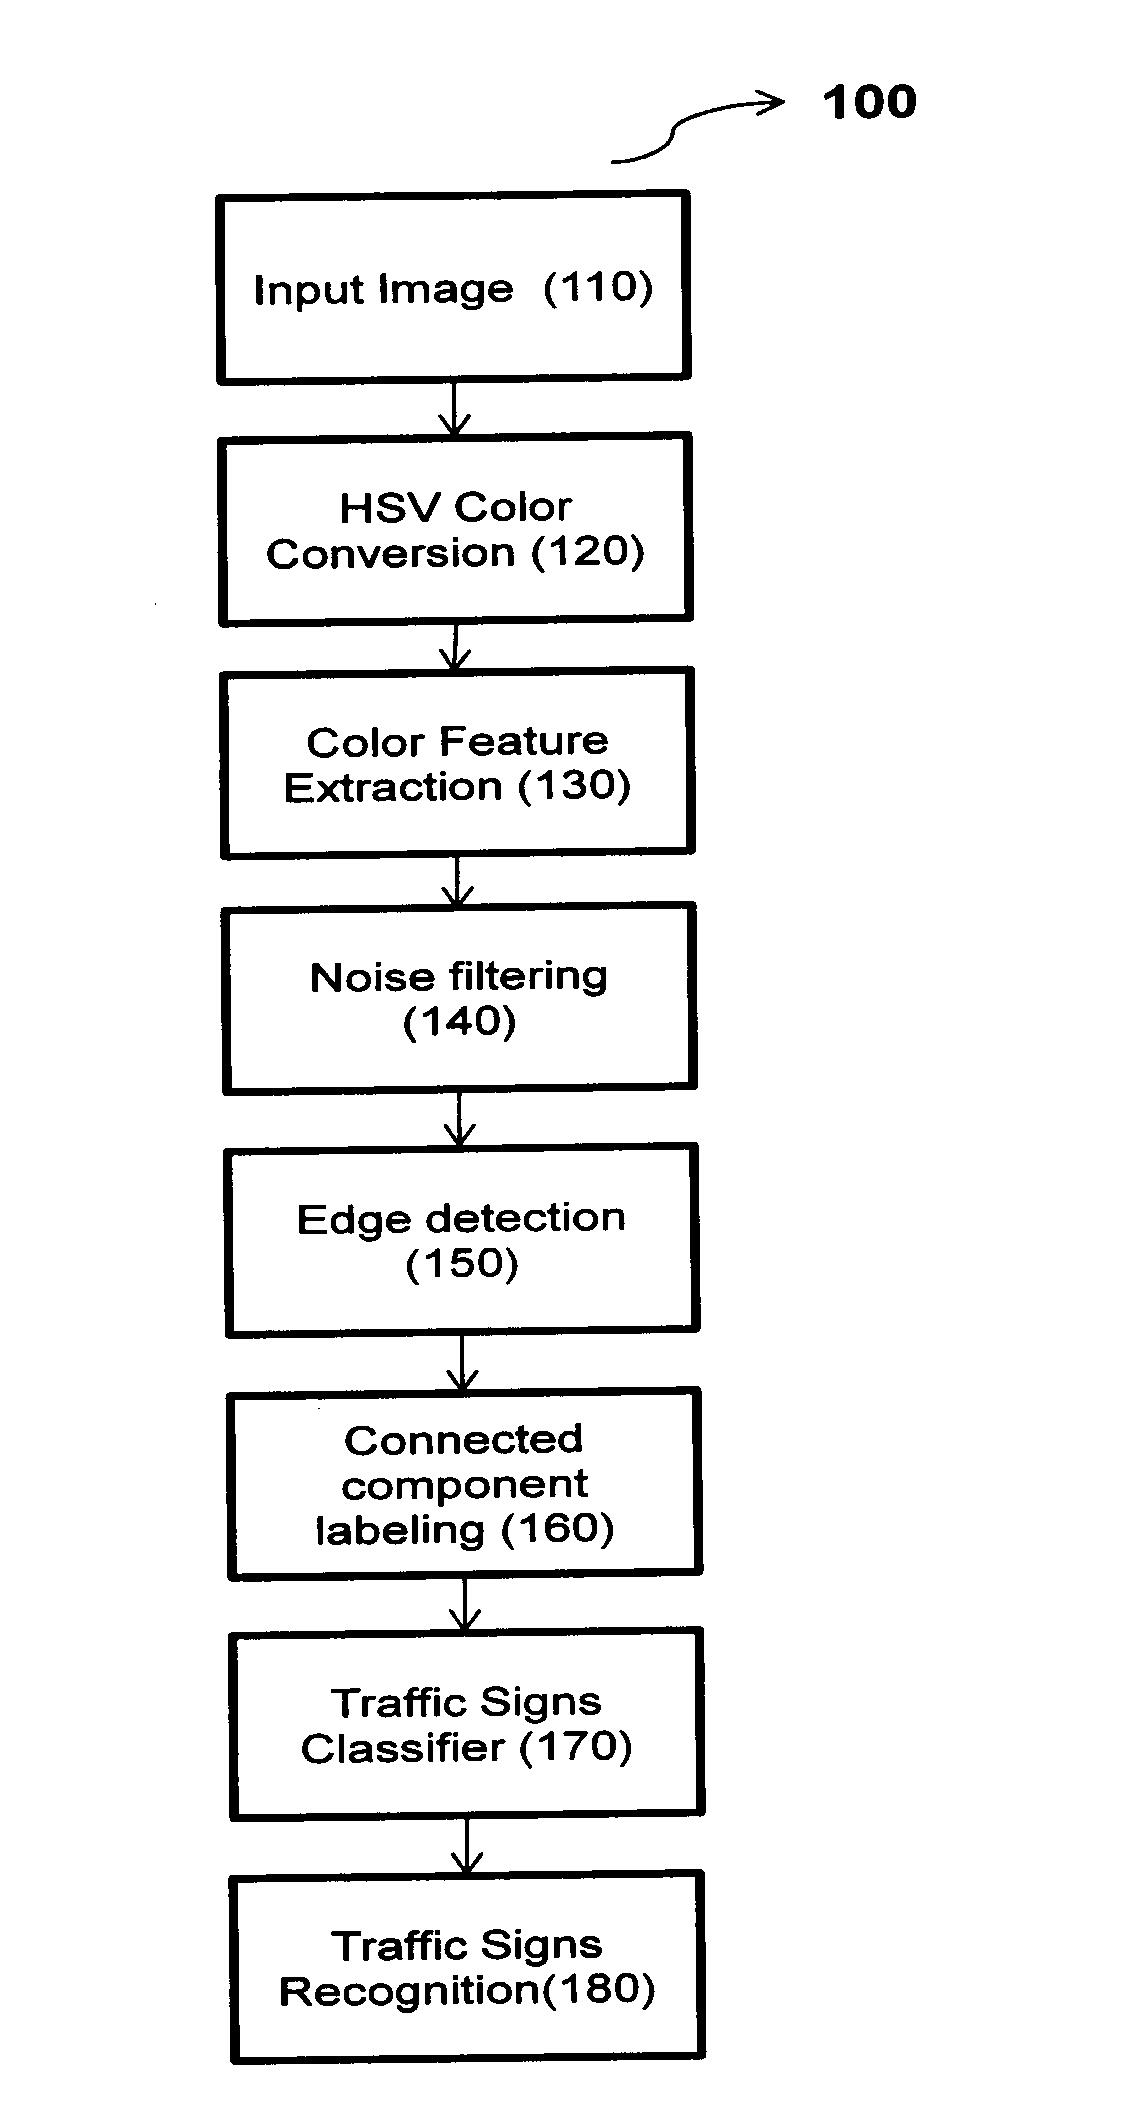 Illumination Invariant and Robust Apparatus and Method for Detecting and Recognizing Various Traffic Signs